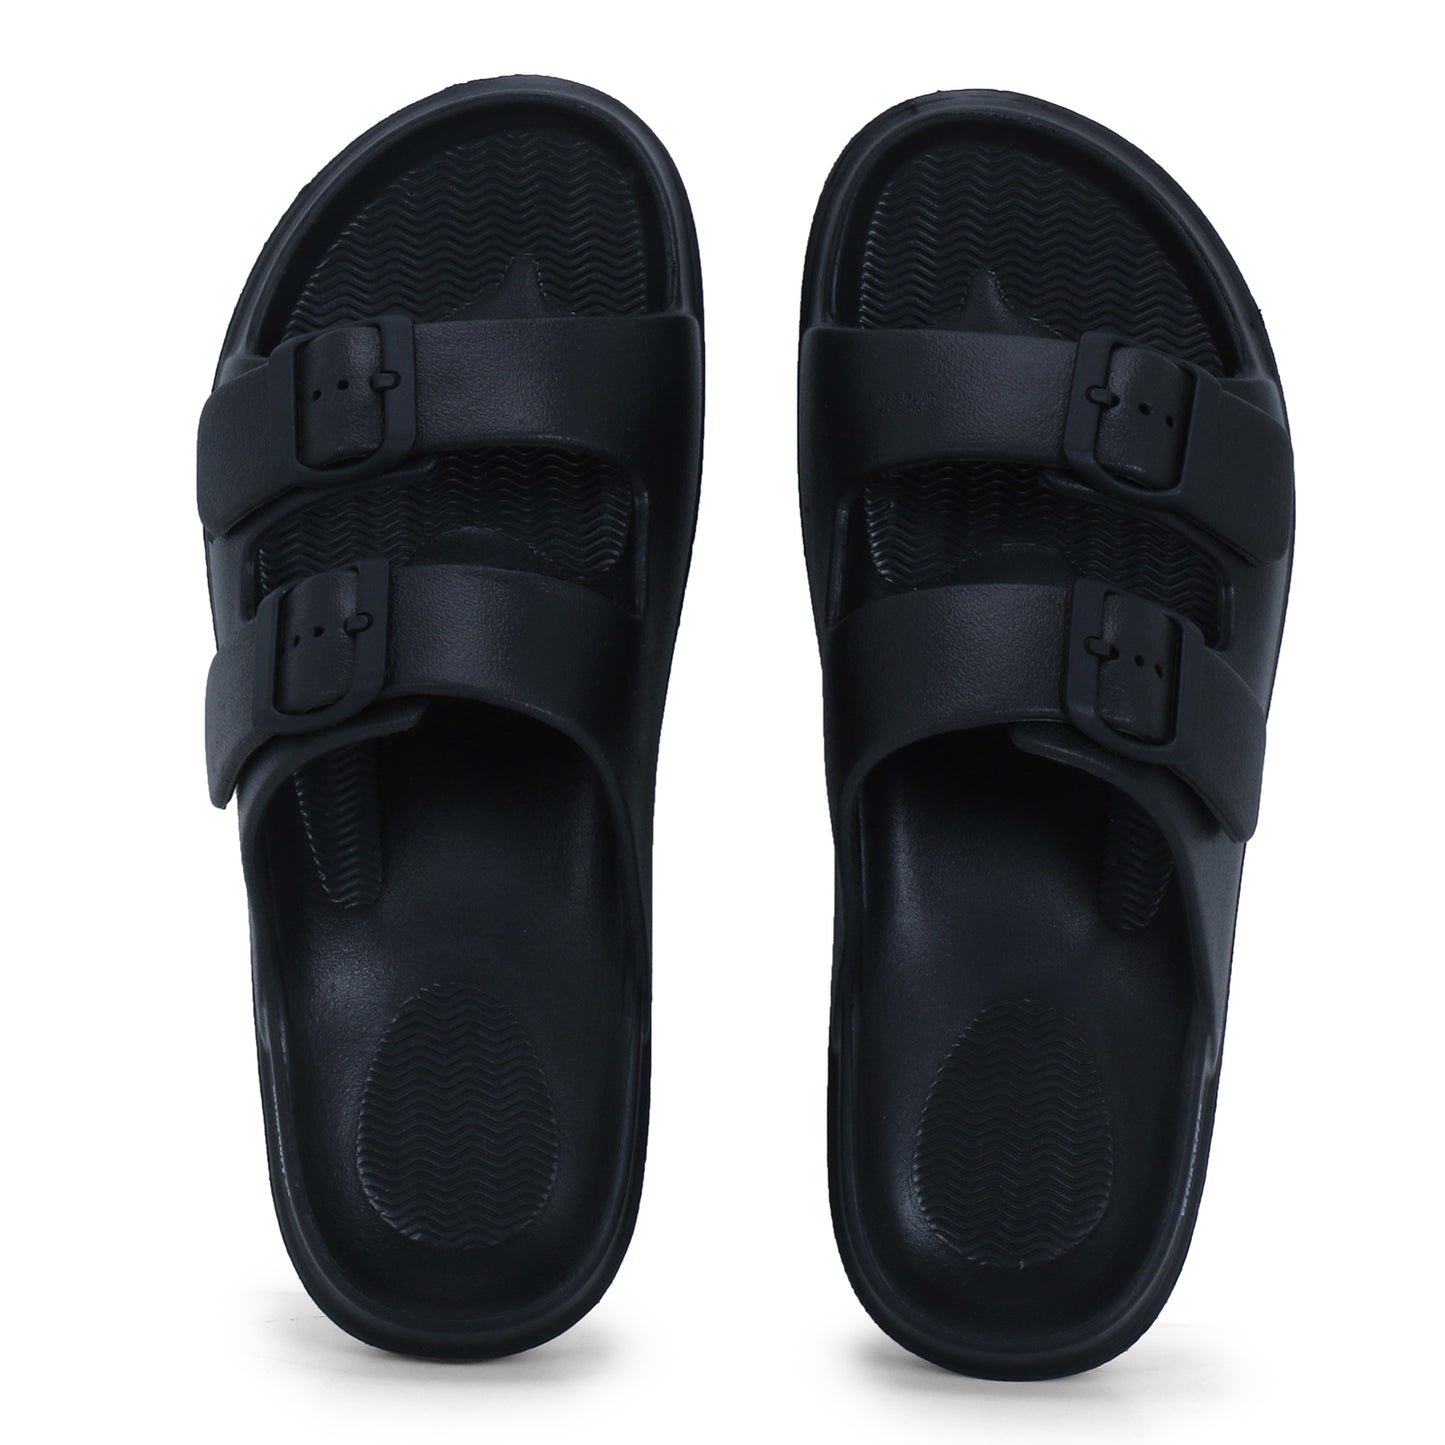 DOCTOR EXTRA SOFT D-505 Men's Classic Cushion Sliders/Slippers with Adjustable Buckle Strap for Adult | Comfortable & LightWeight |Stylish & Anti-Skid| Waterproof & Everyday Flip Flops for Gents/Boys